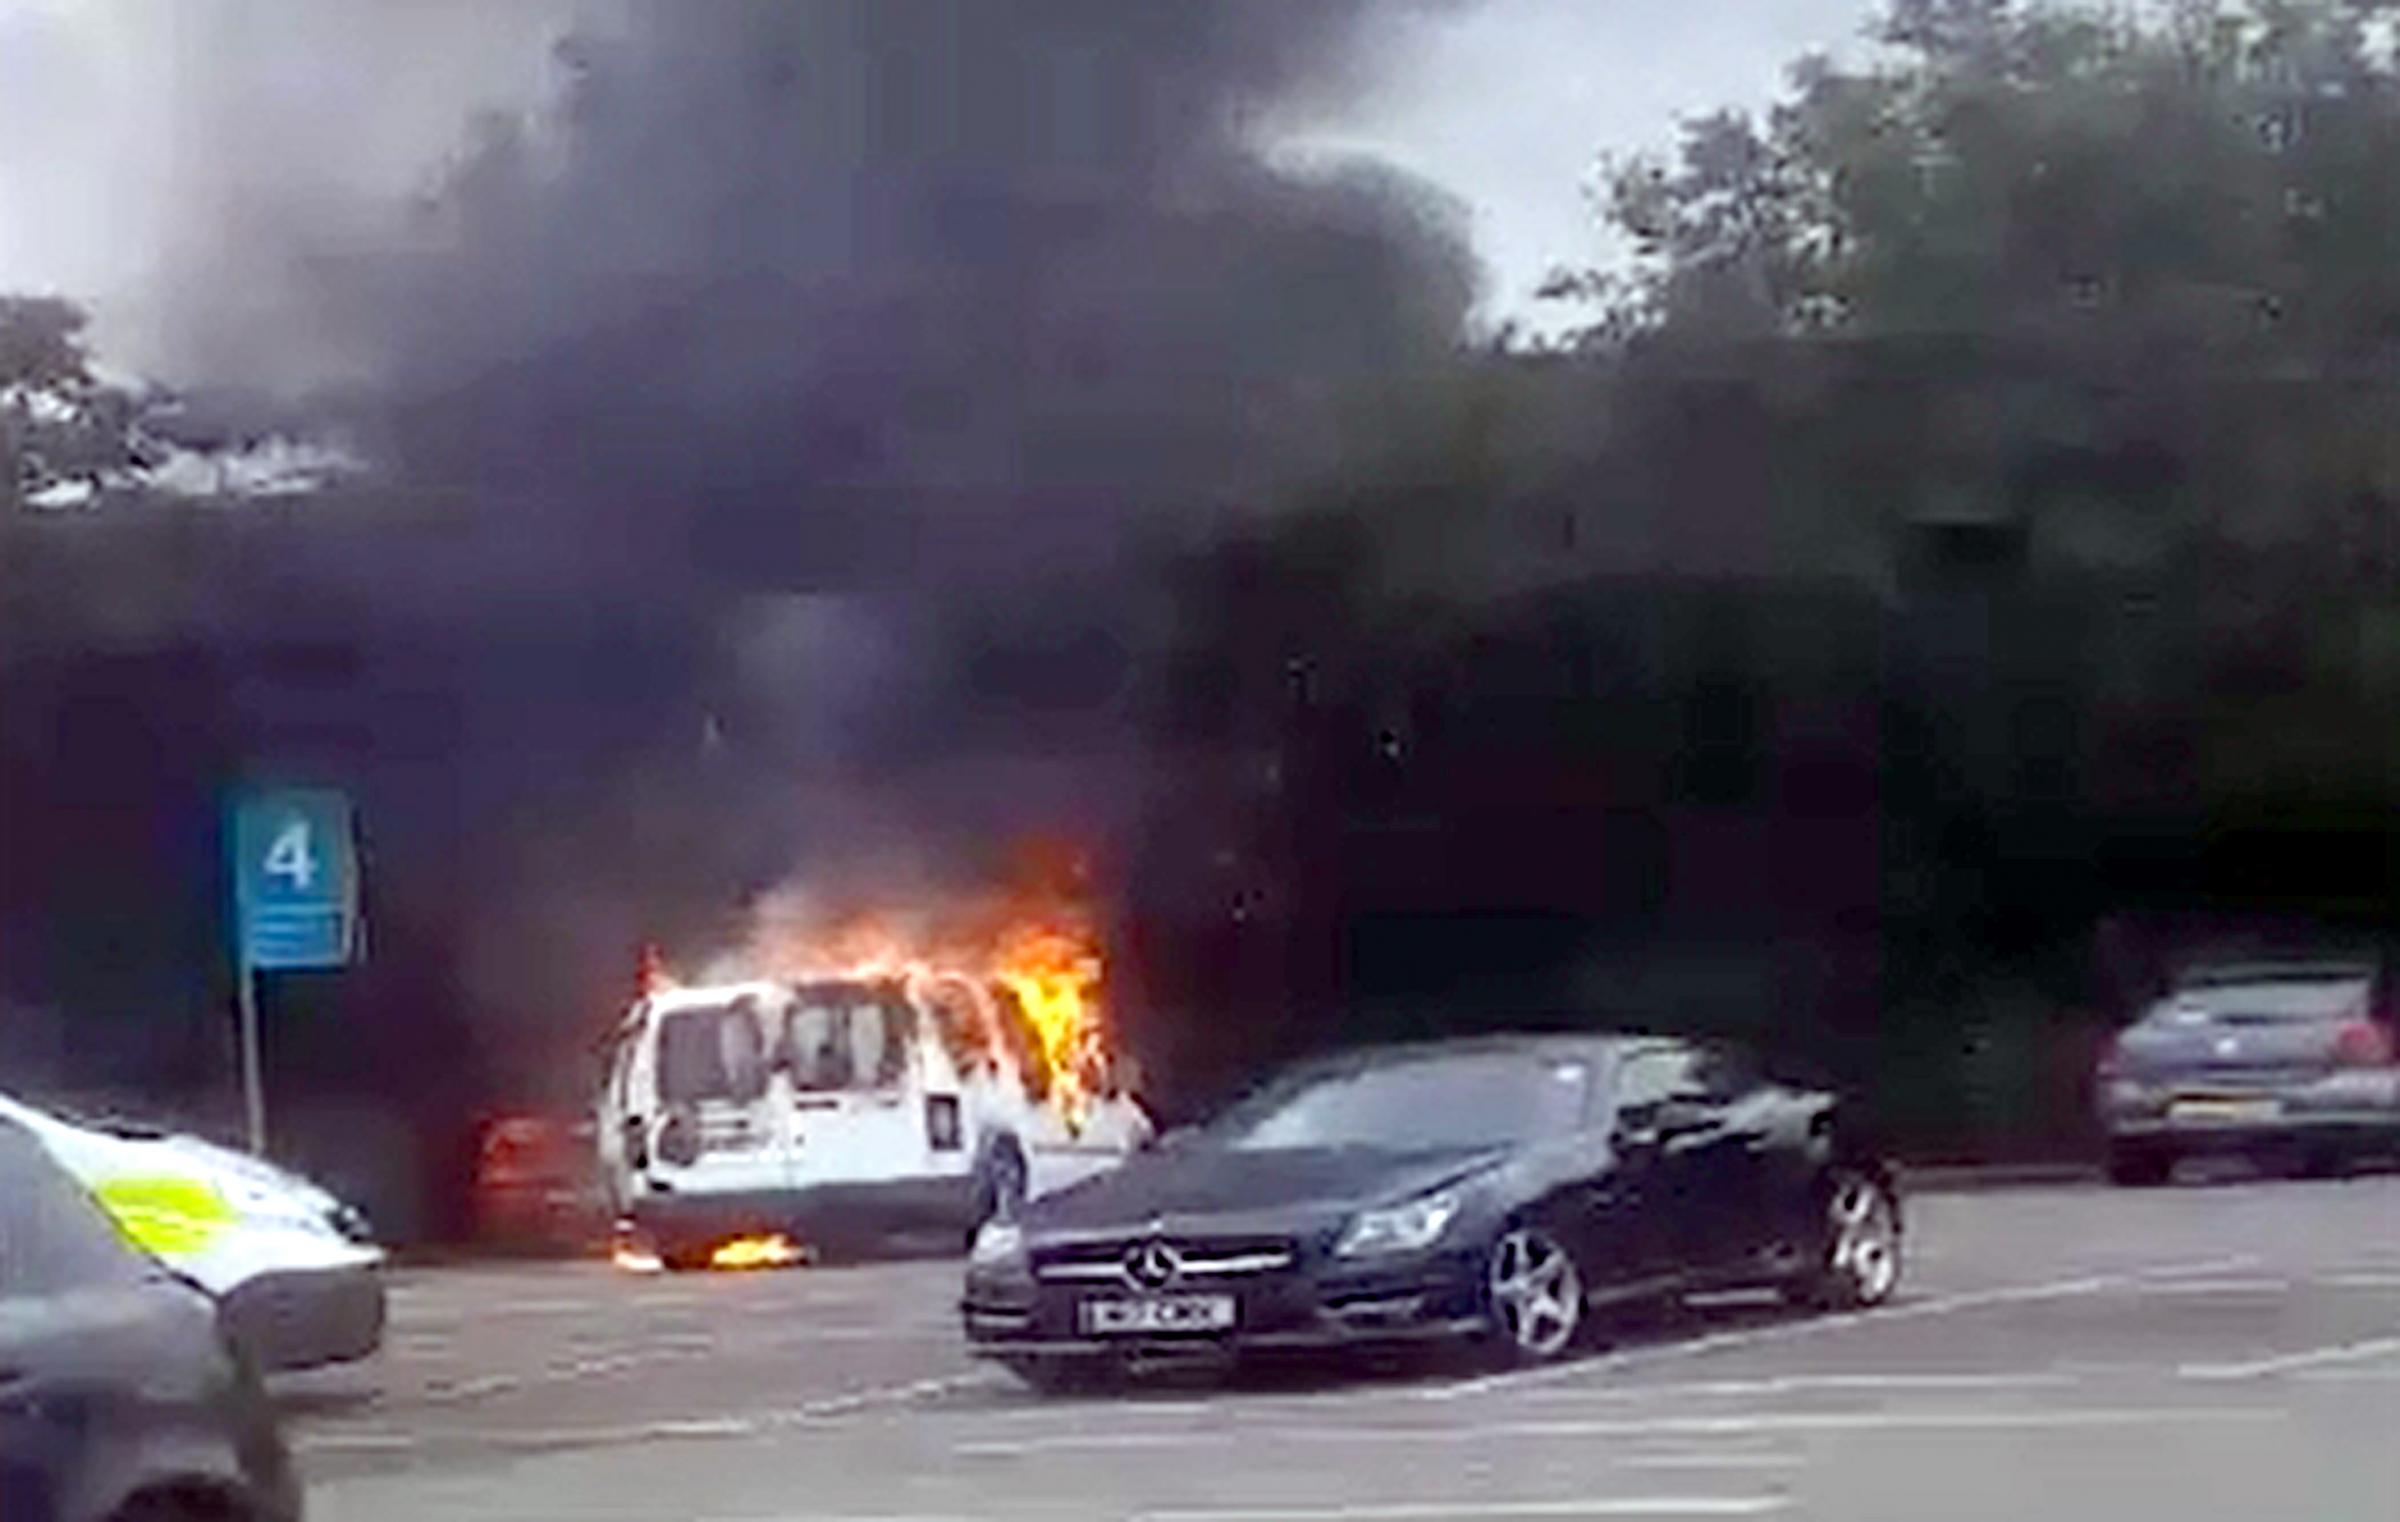 Mum shopping with daughter, 2, describes 'scary' moment van went up in flames after 'armed robbery'